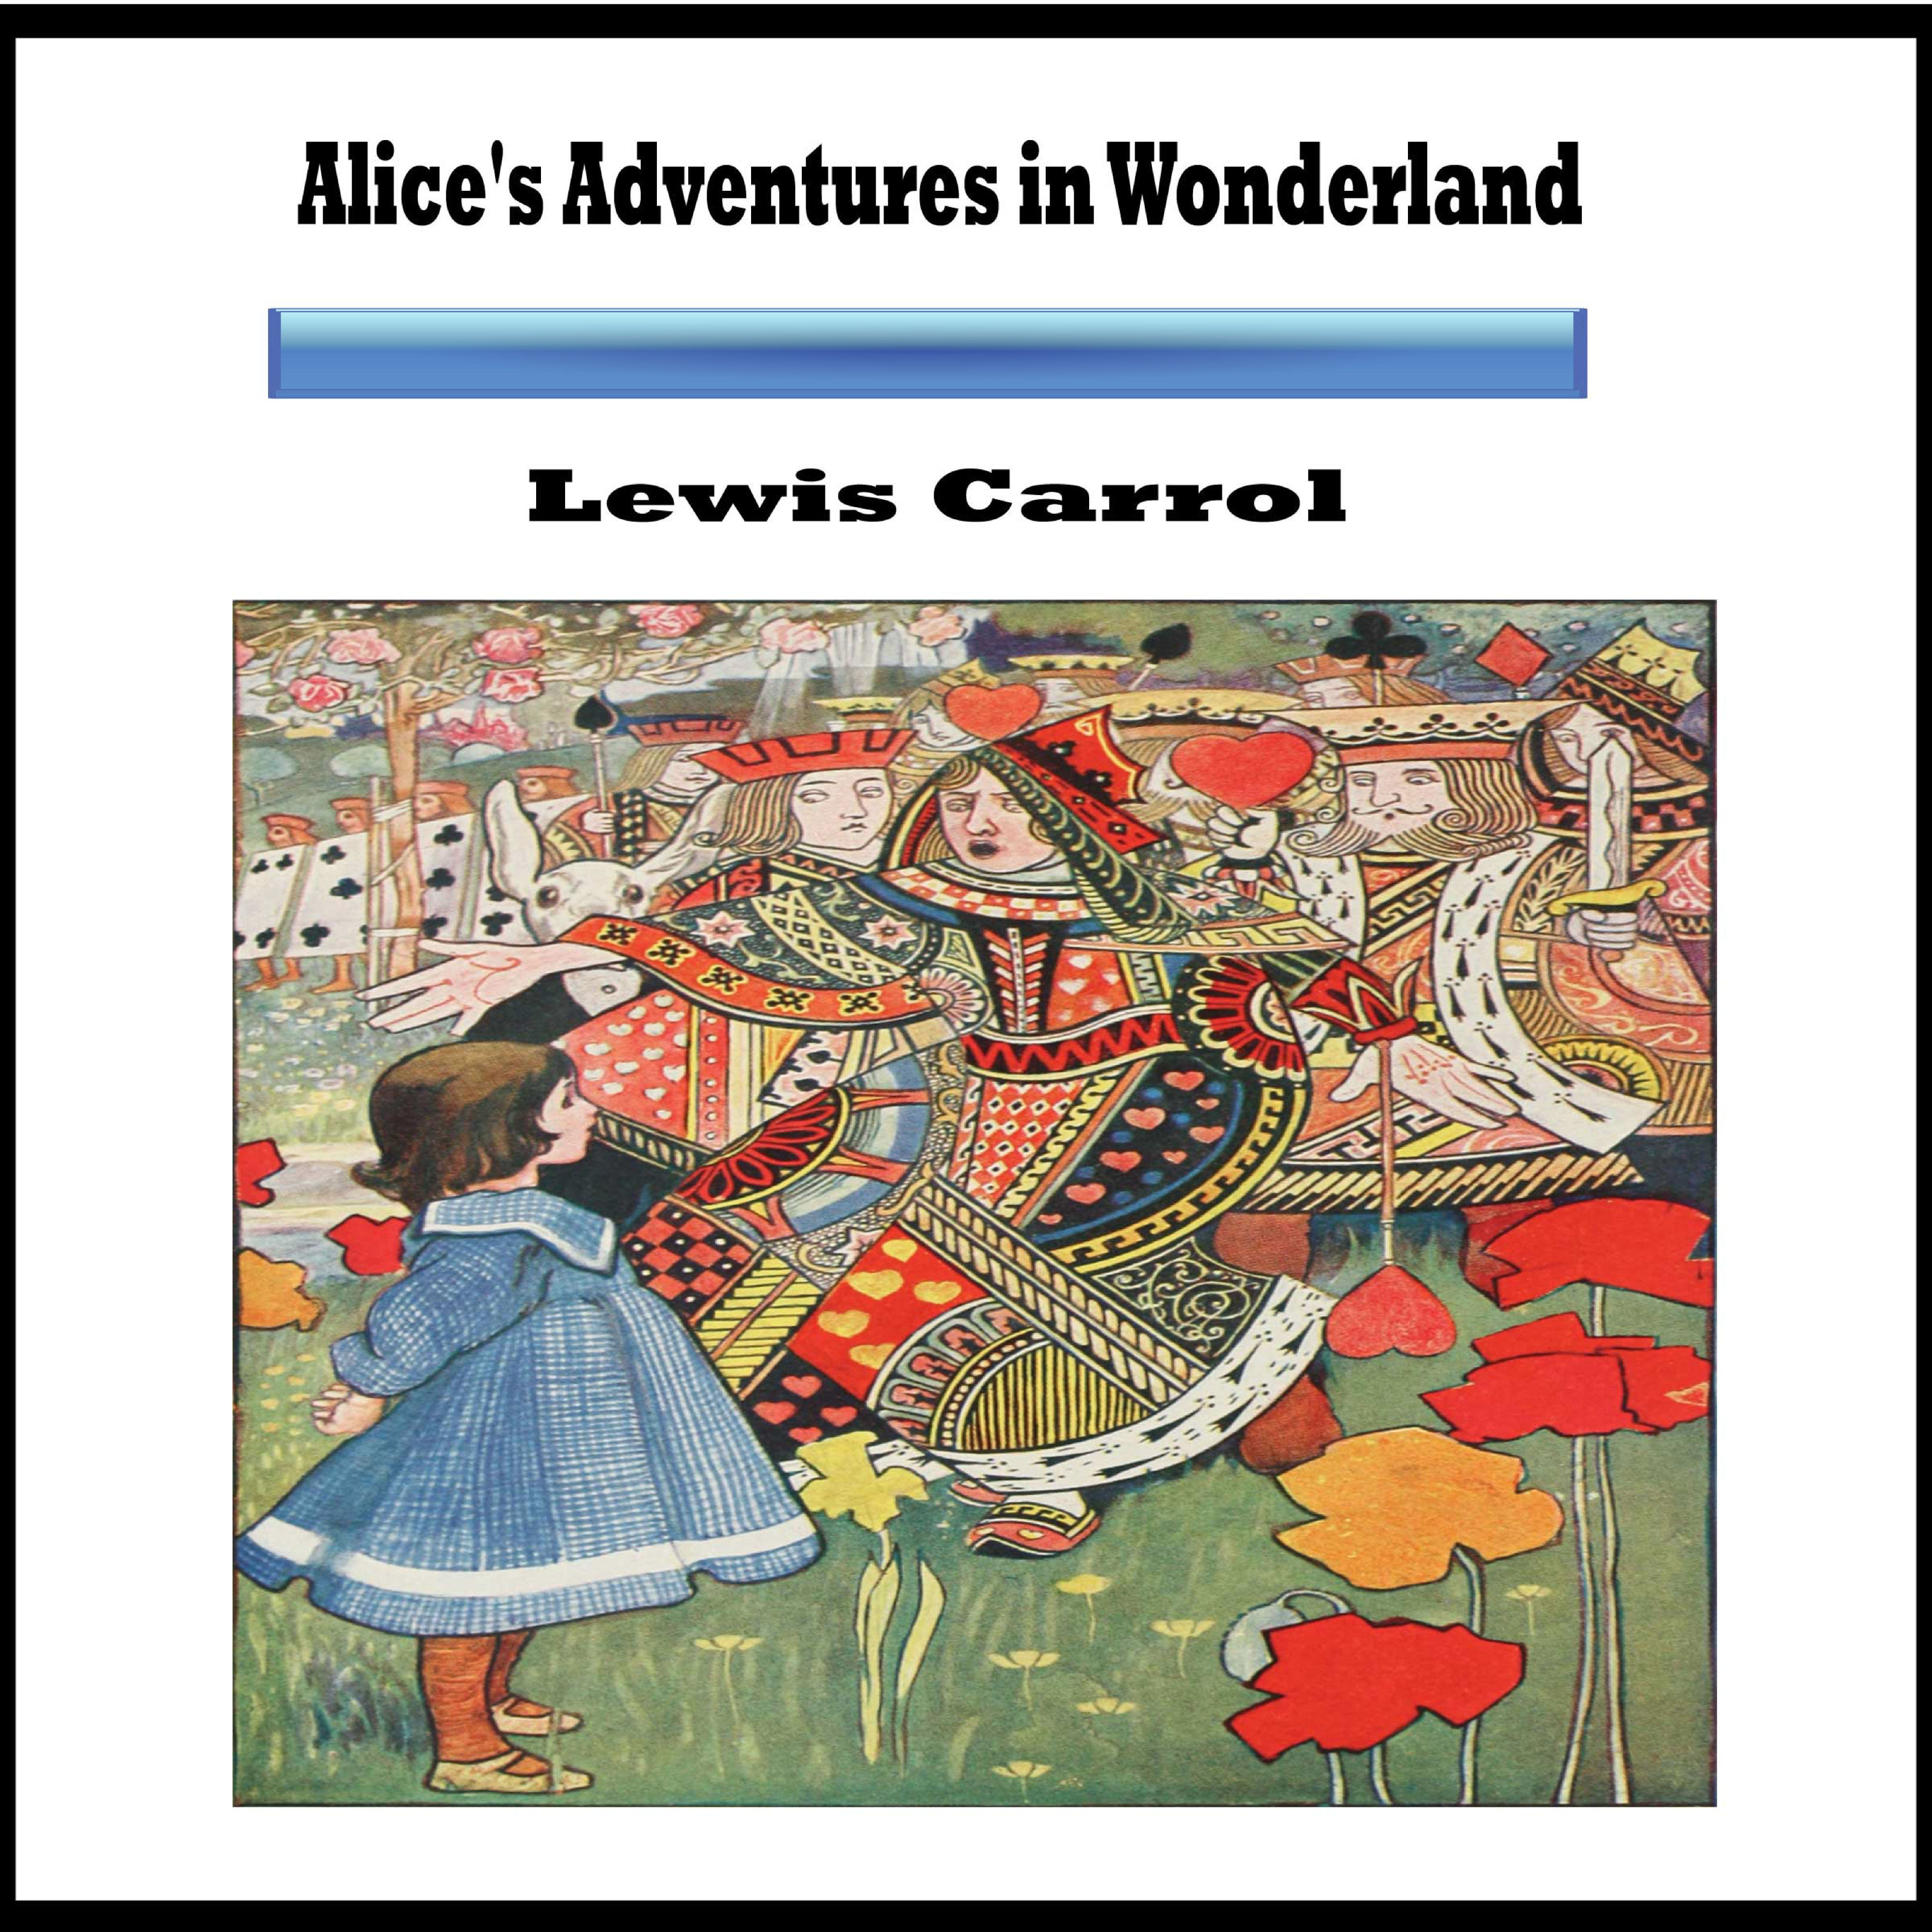 Lewis Carroll: Alice's Adventures in Wonderland, Chapter 4: The Rabbit Sends in a Bill